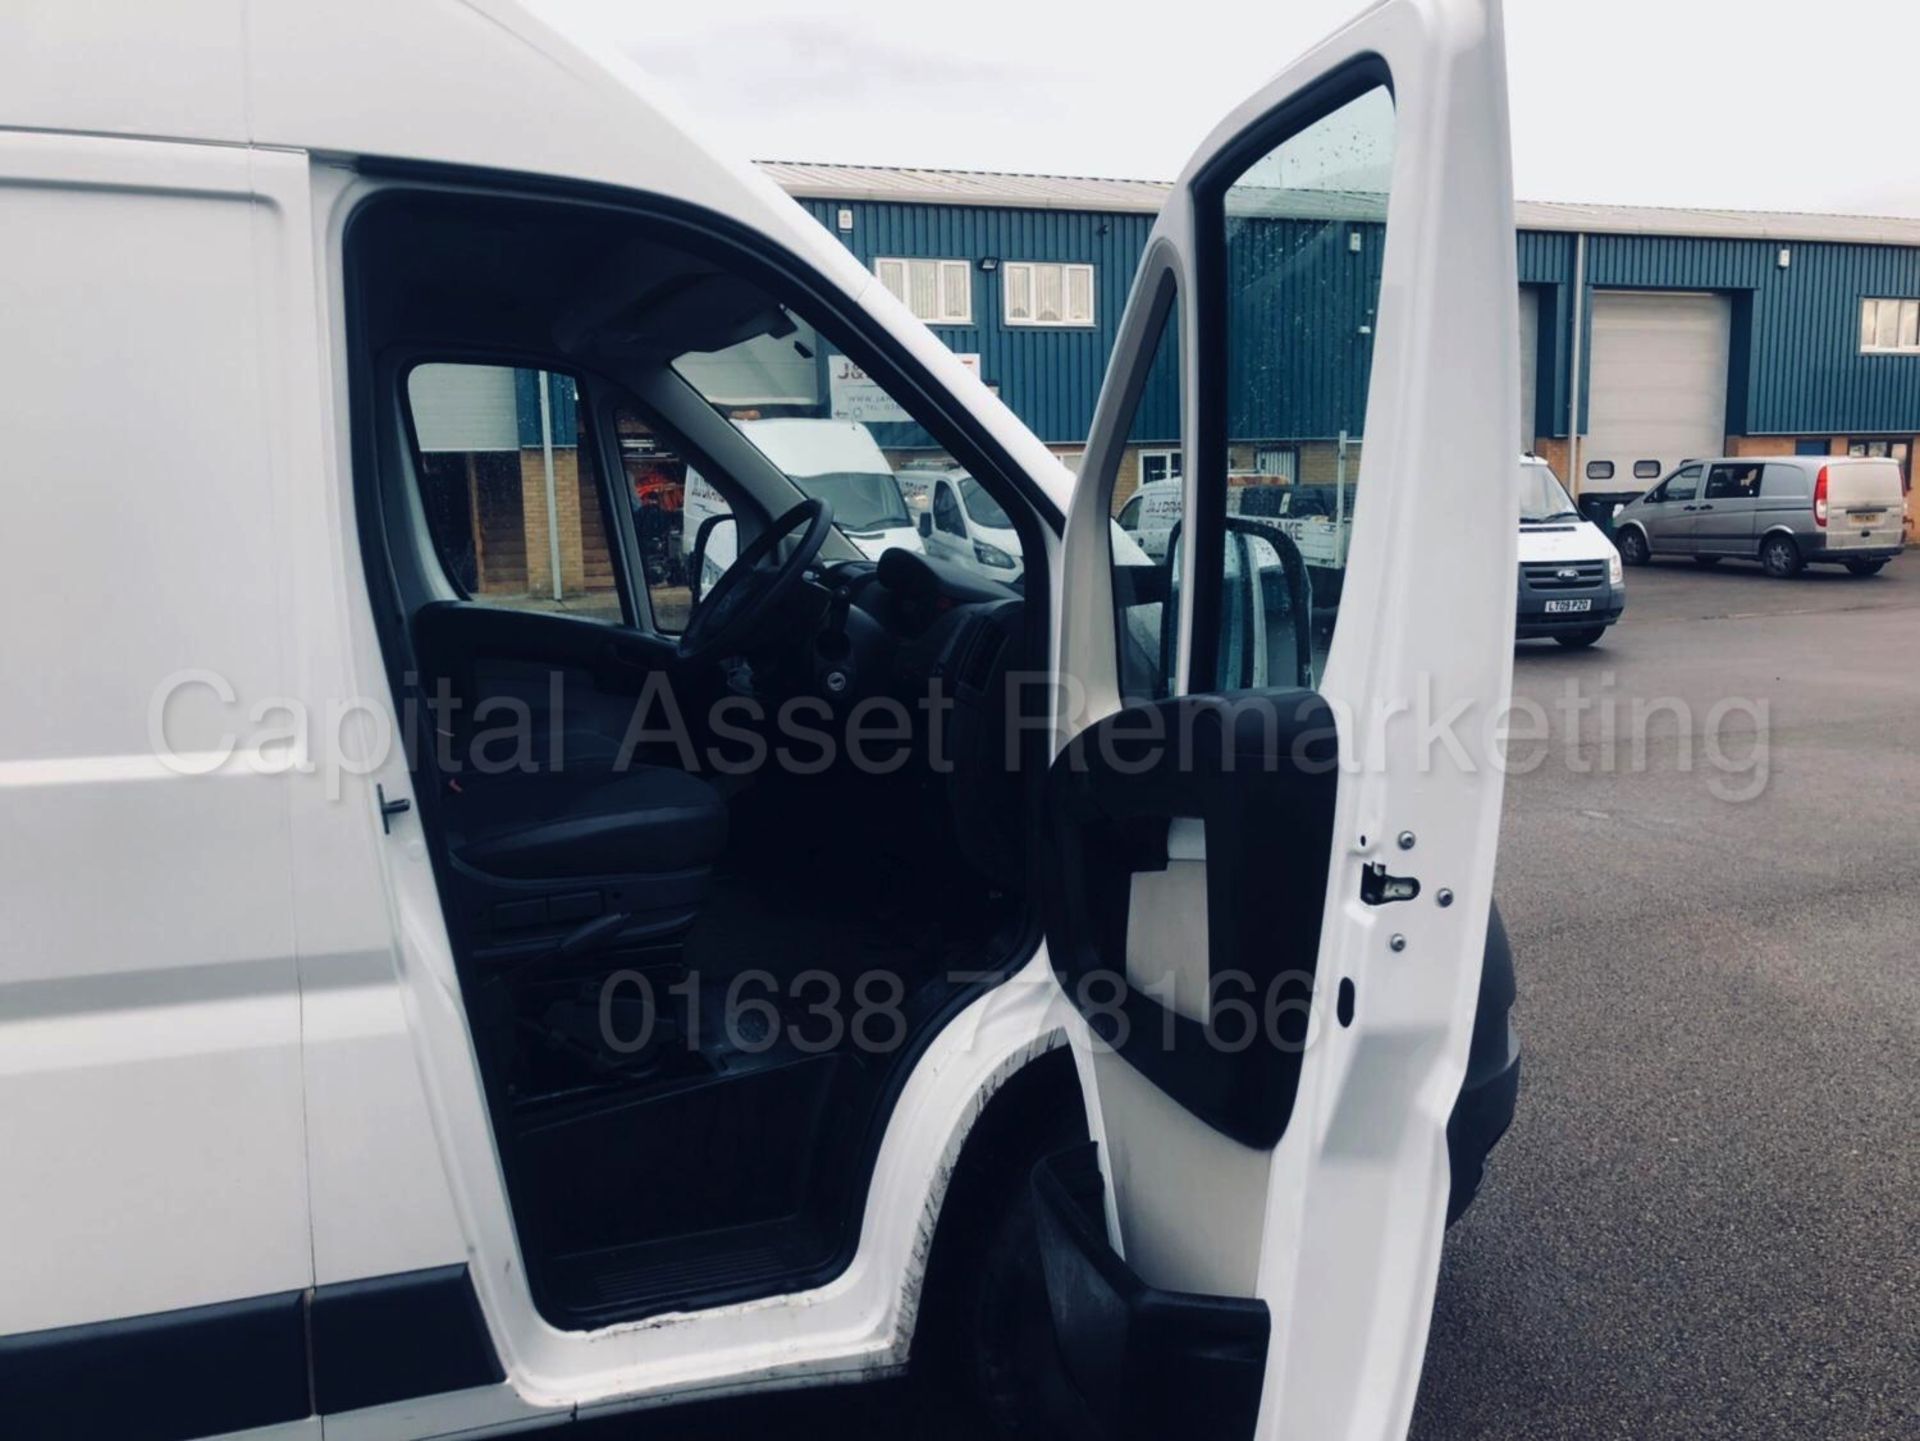 CITREON RELAY 35 'LWB HI-ROOF' (2012 - 12 REG) '2.2 HDI - 130 BHP - 6 SPEED' **ELECTRIC PACK** - Image 14 of 20